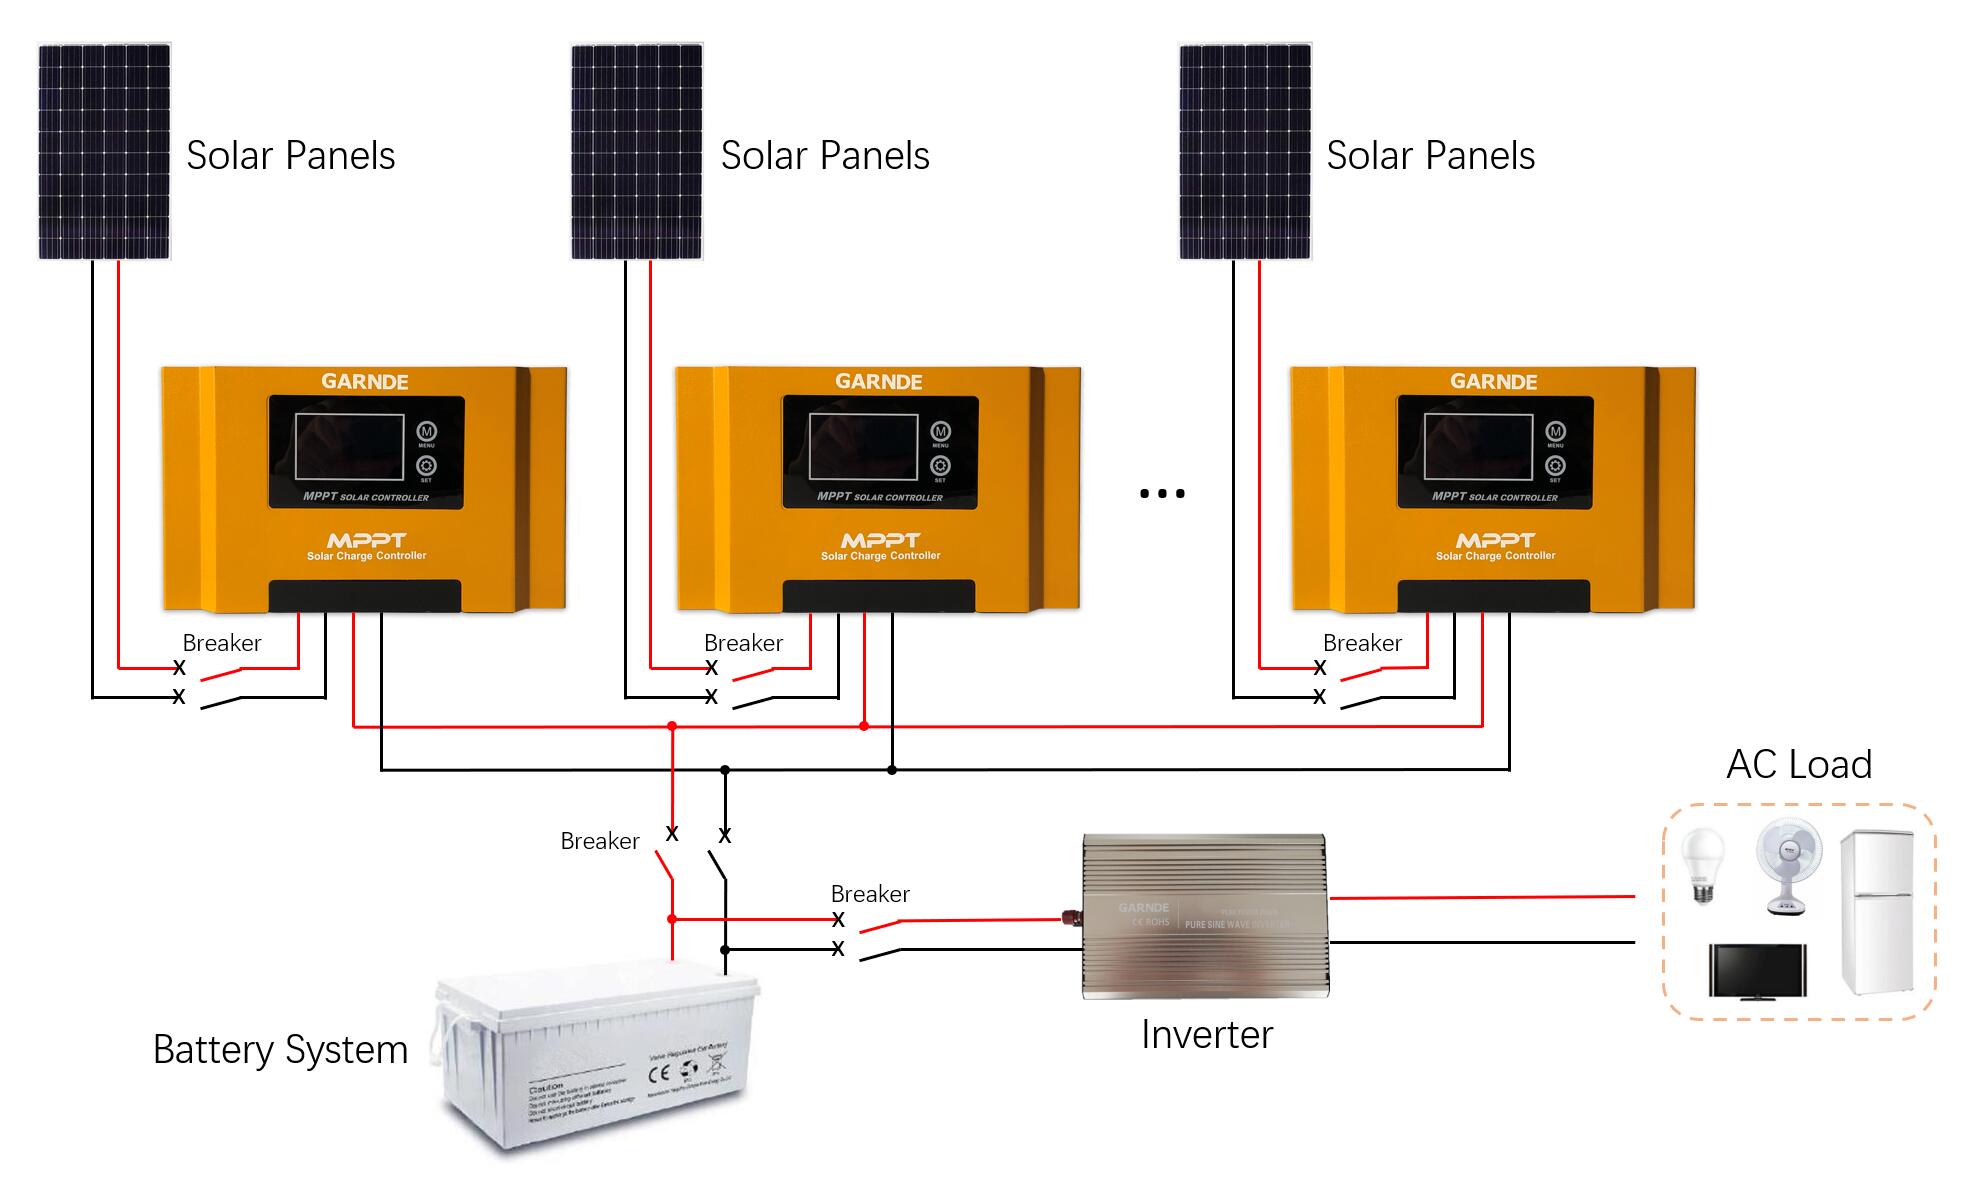 Rosefinch series MPPT Solar Charge Controller